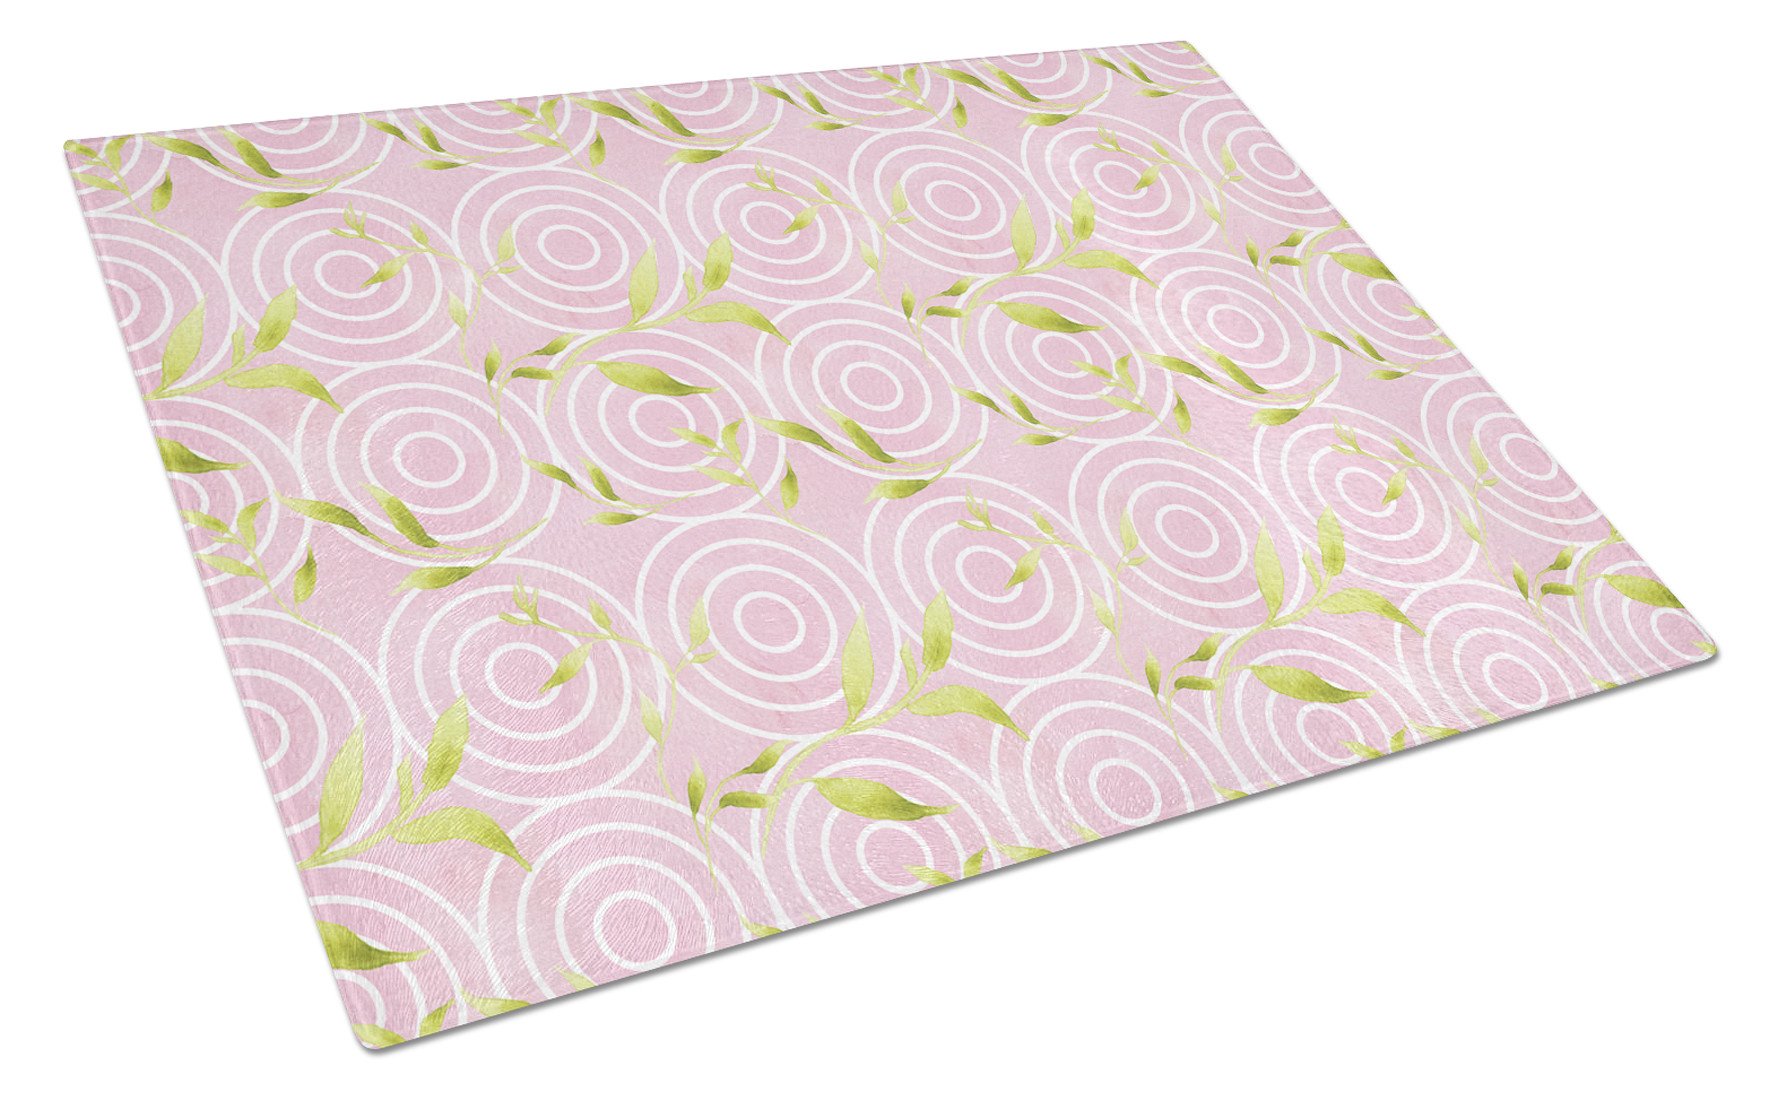 Gemoetric Circles on Pink Watercolor Glass Cutting Board Large BB7492LCB by Caroline's Treasures